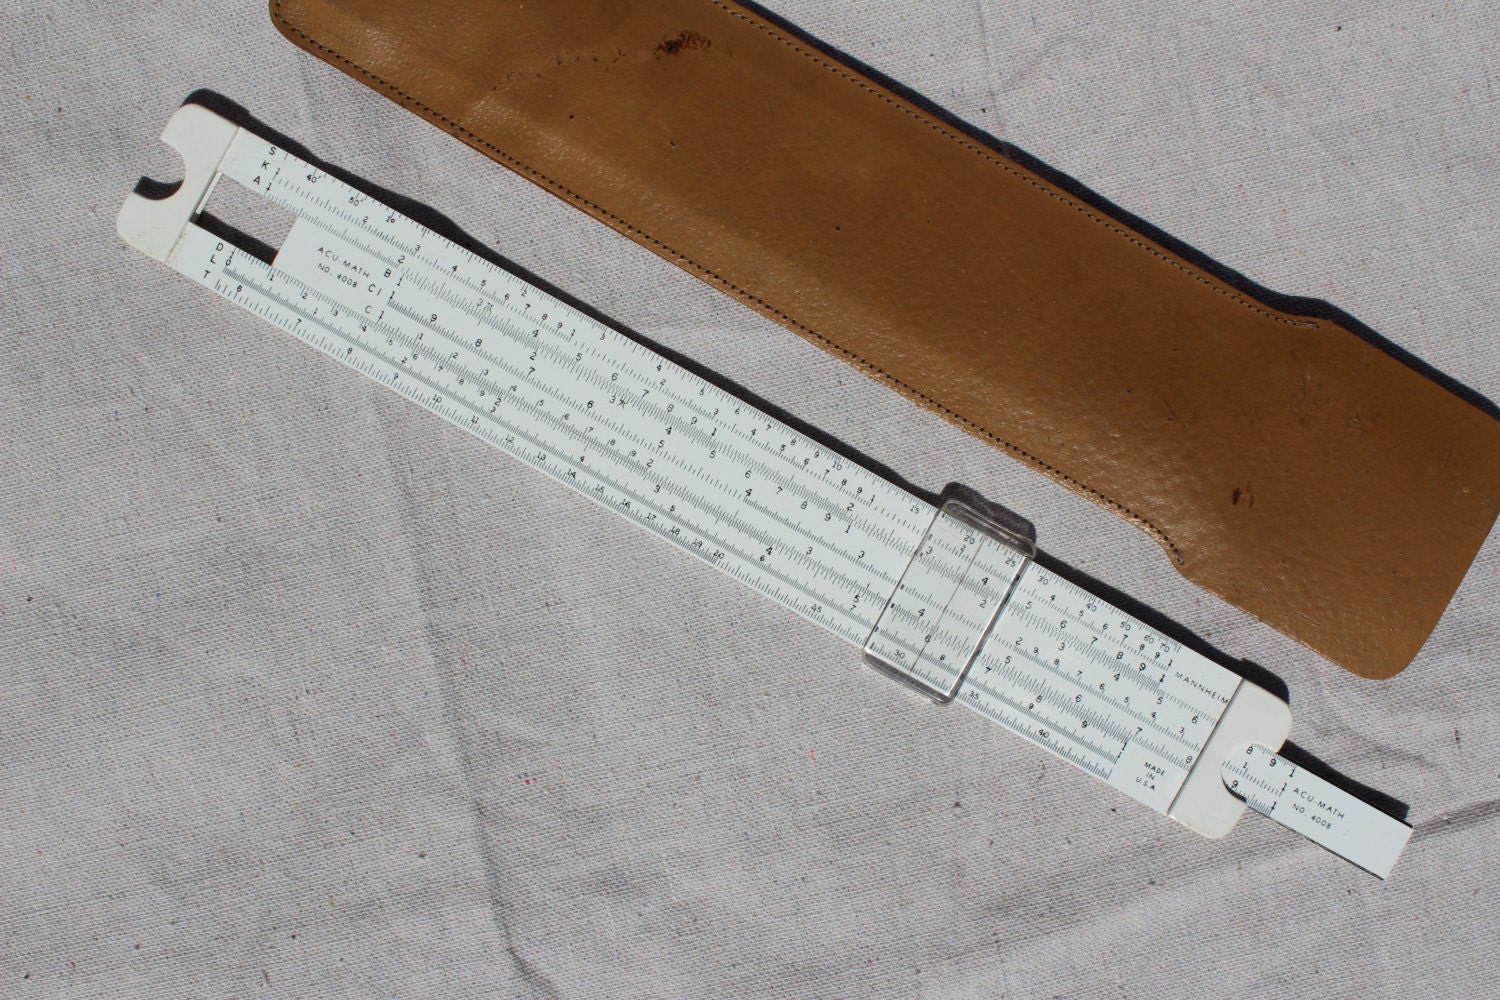 ACU-MATH Mannheim No. 4008 Professional Slide Rule, 1960's, In Case Retro Tool Mid Century Tool Collectible